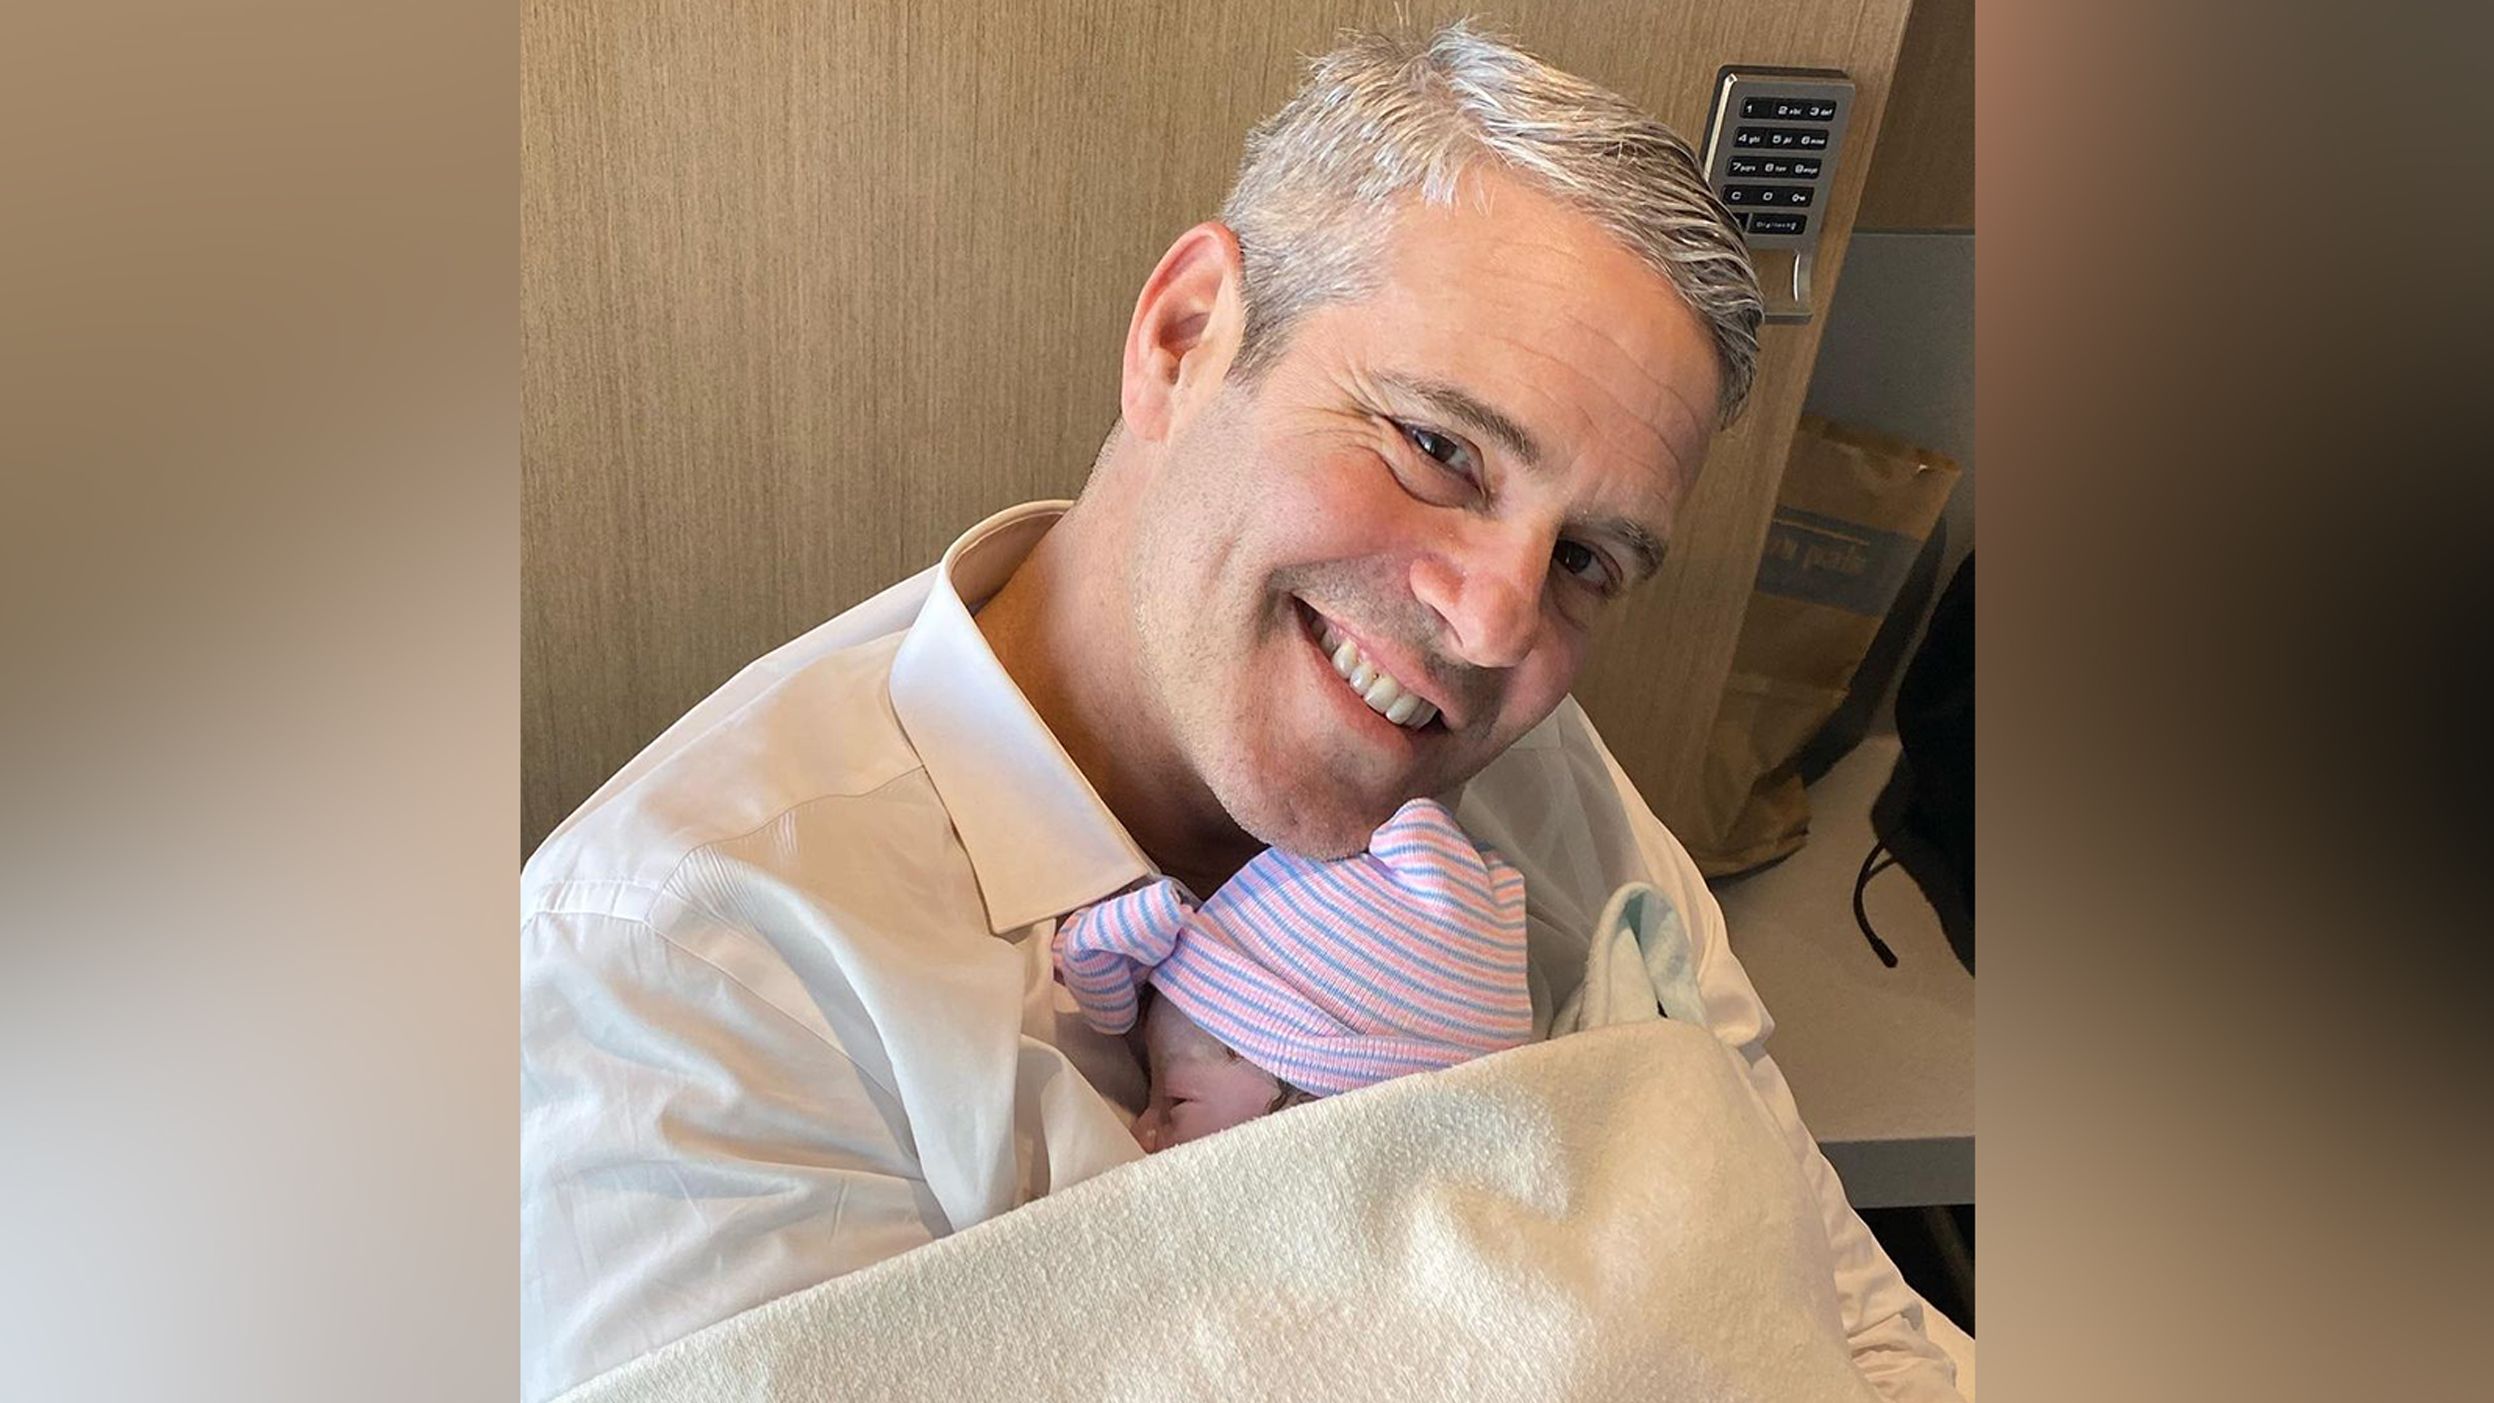 Bravo host Andy Cohen announced the birth of his second child via surrogate on Friday.